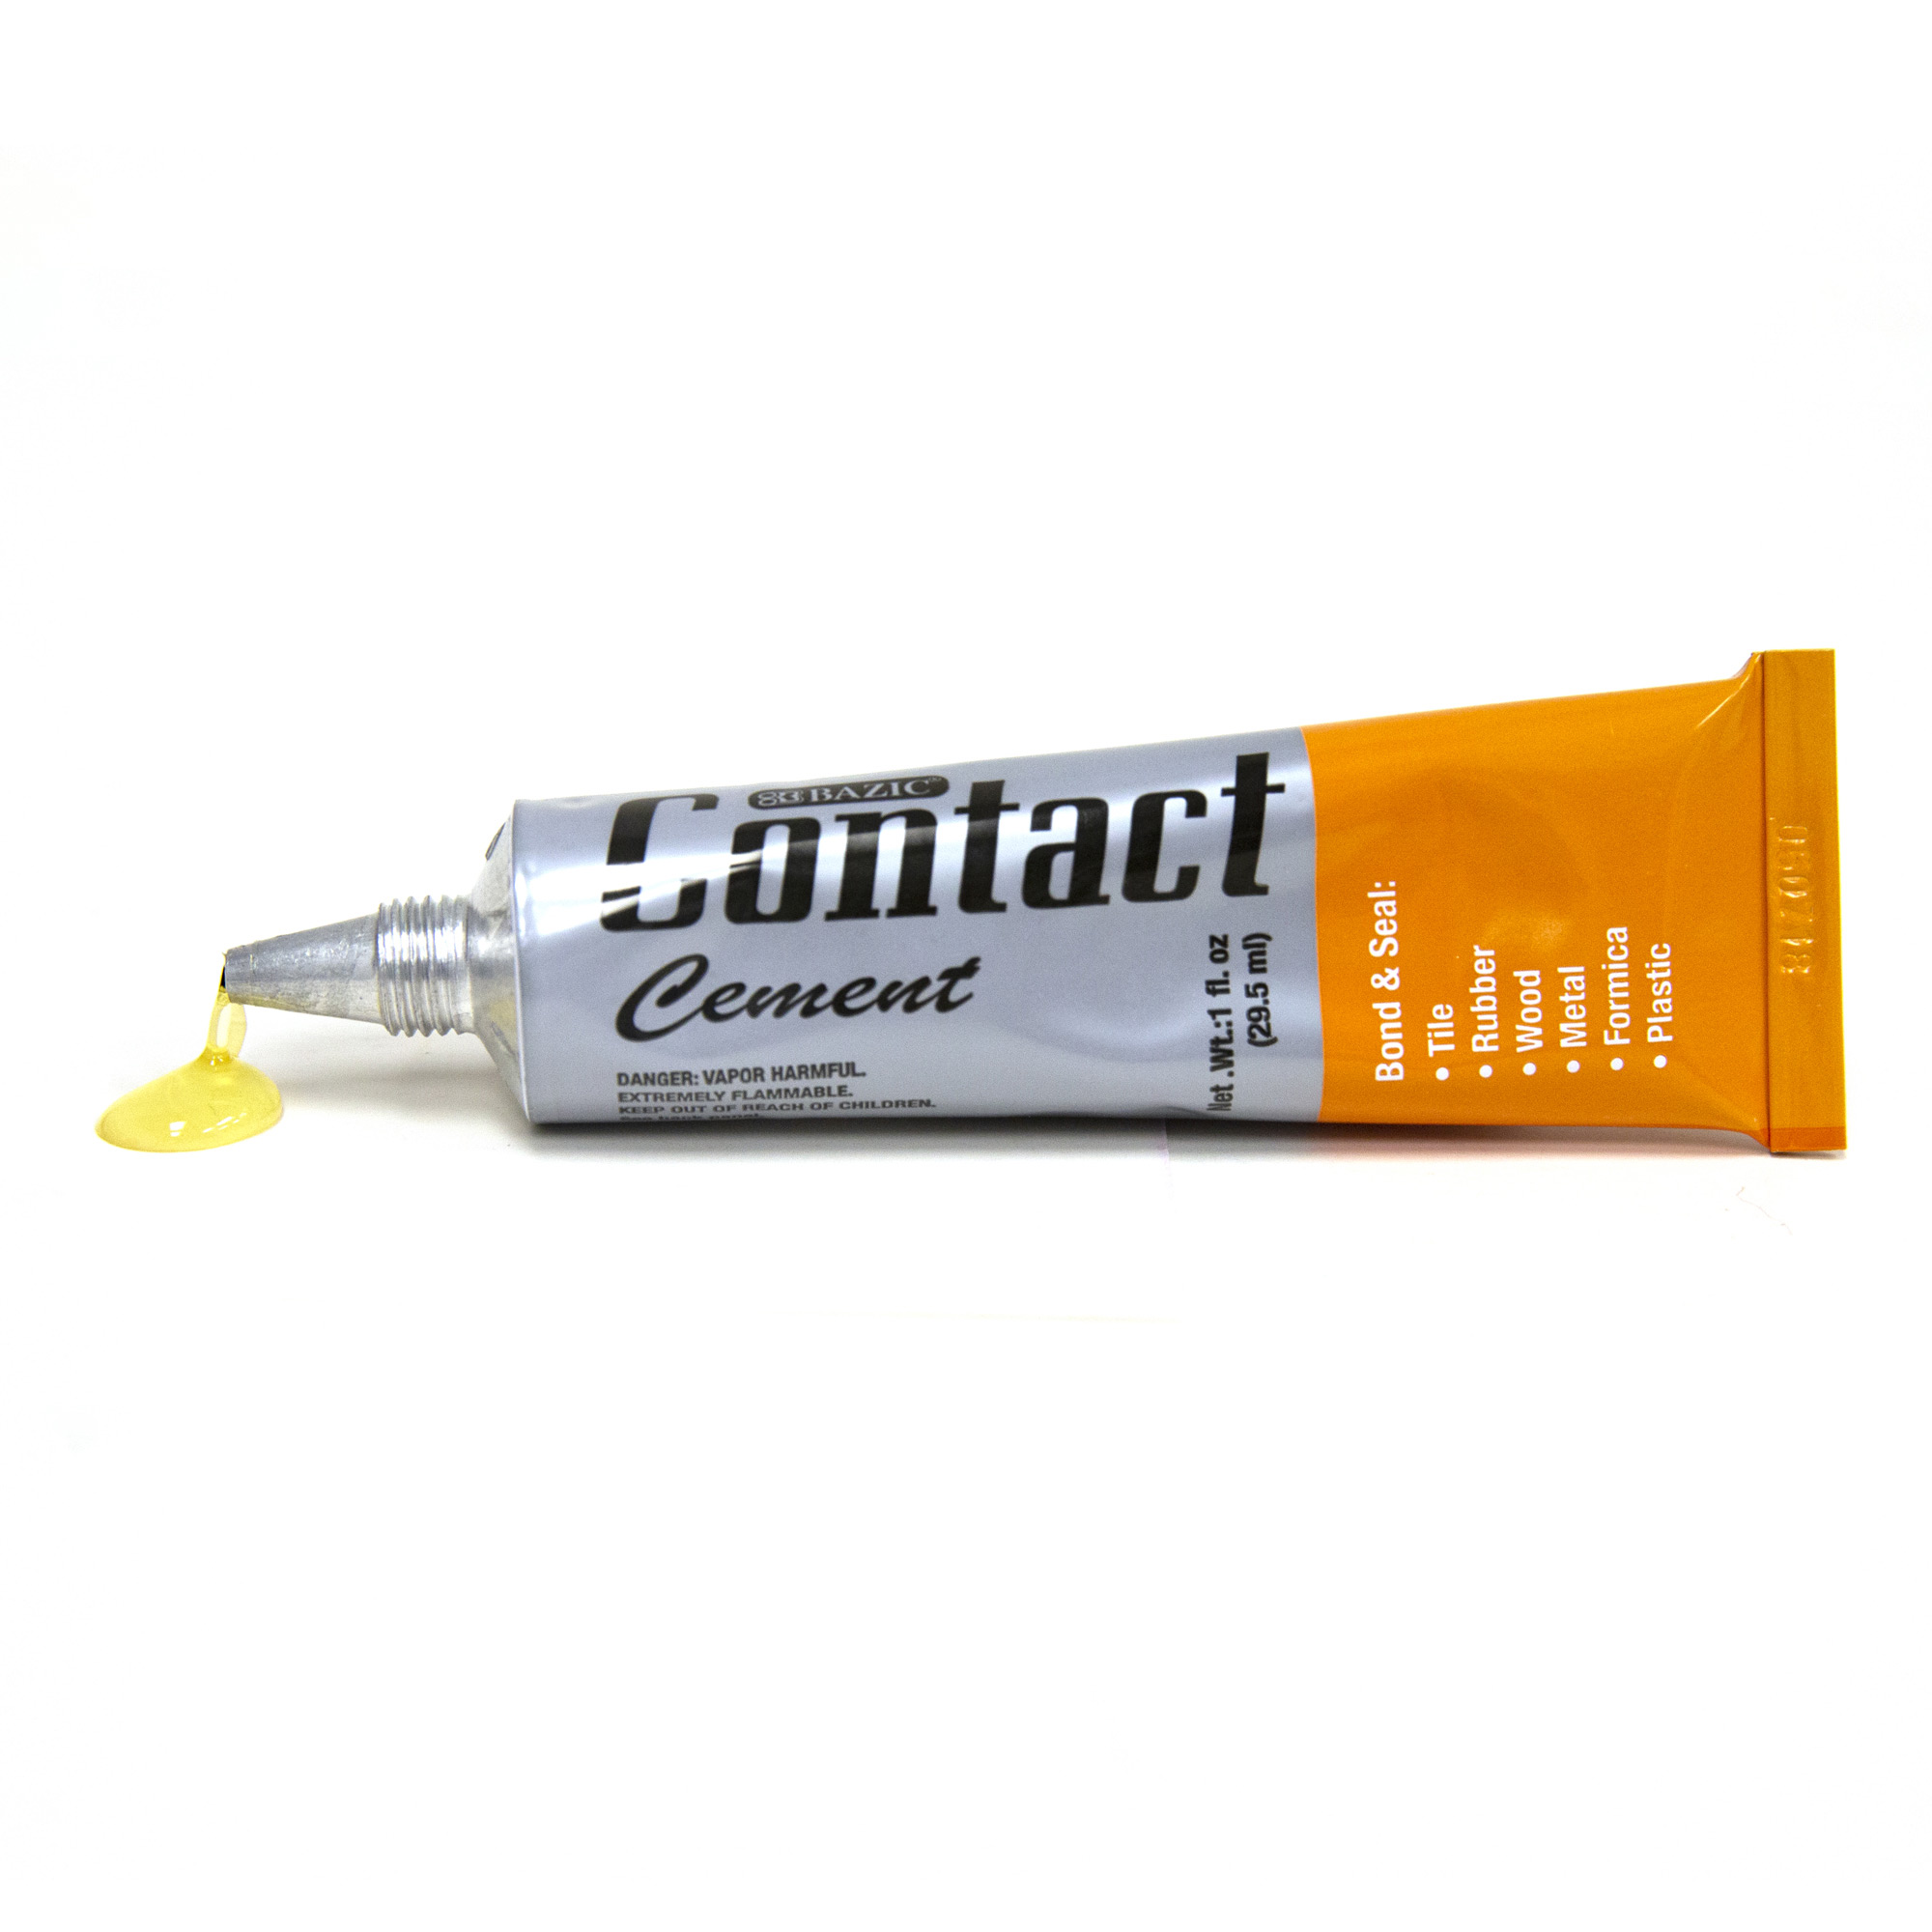 BAZIC 1 FL OZ (30 mL) Contact Cement Adhesive Bazic Products